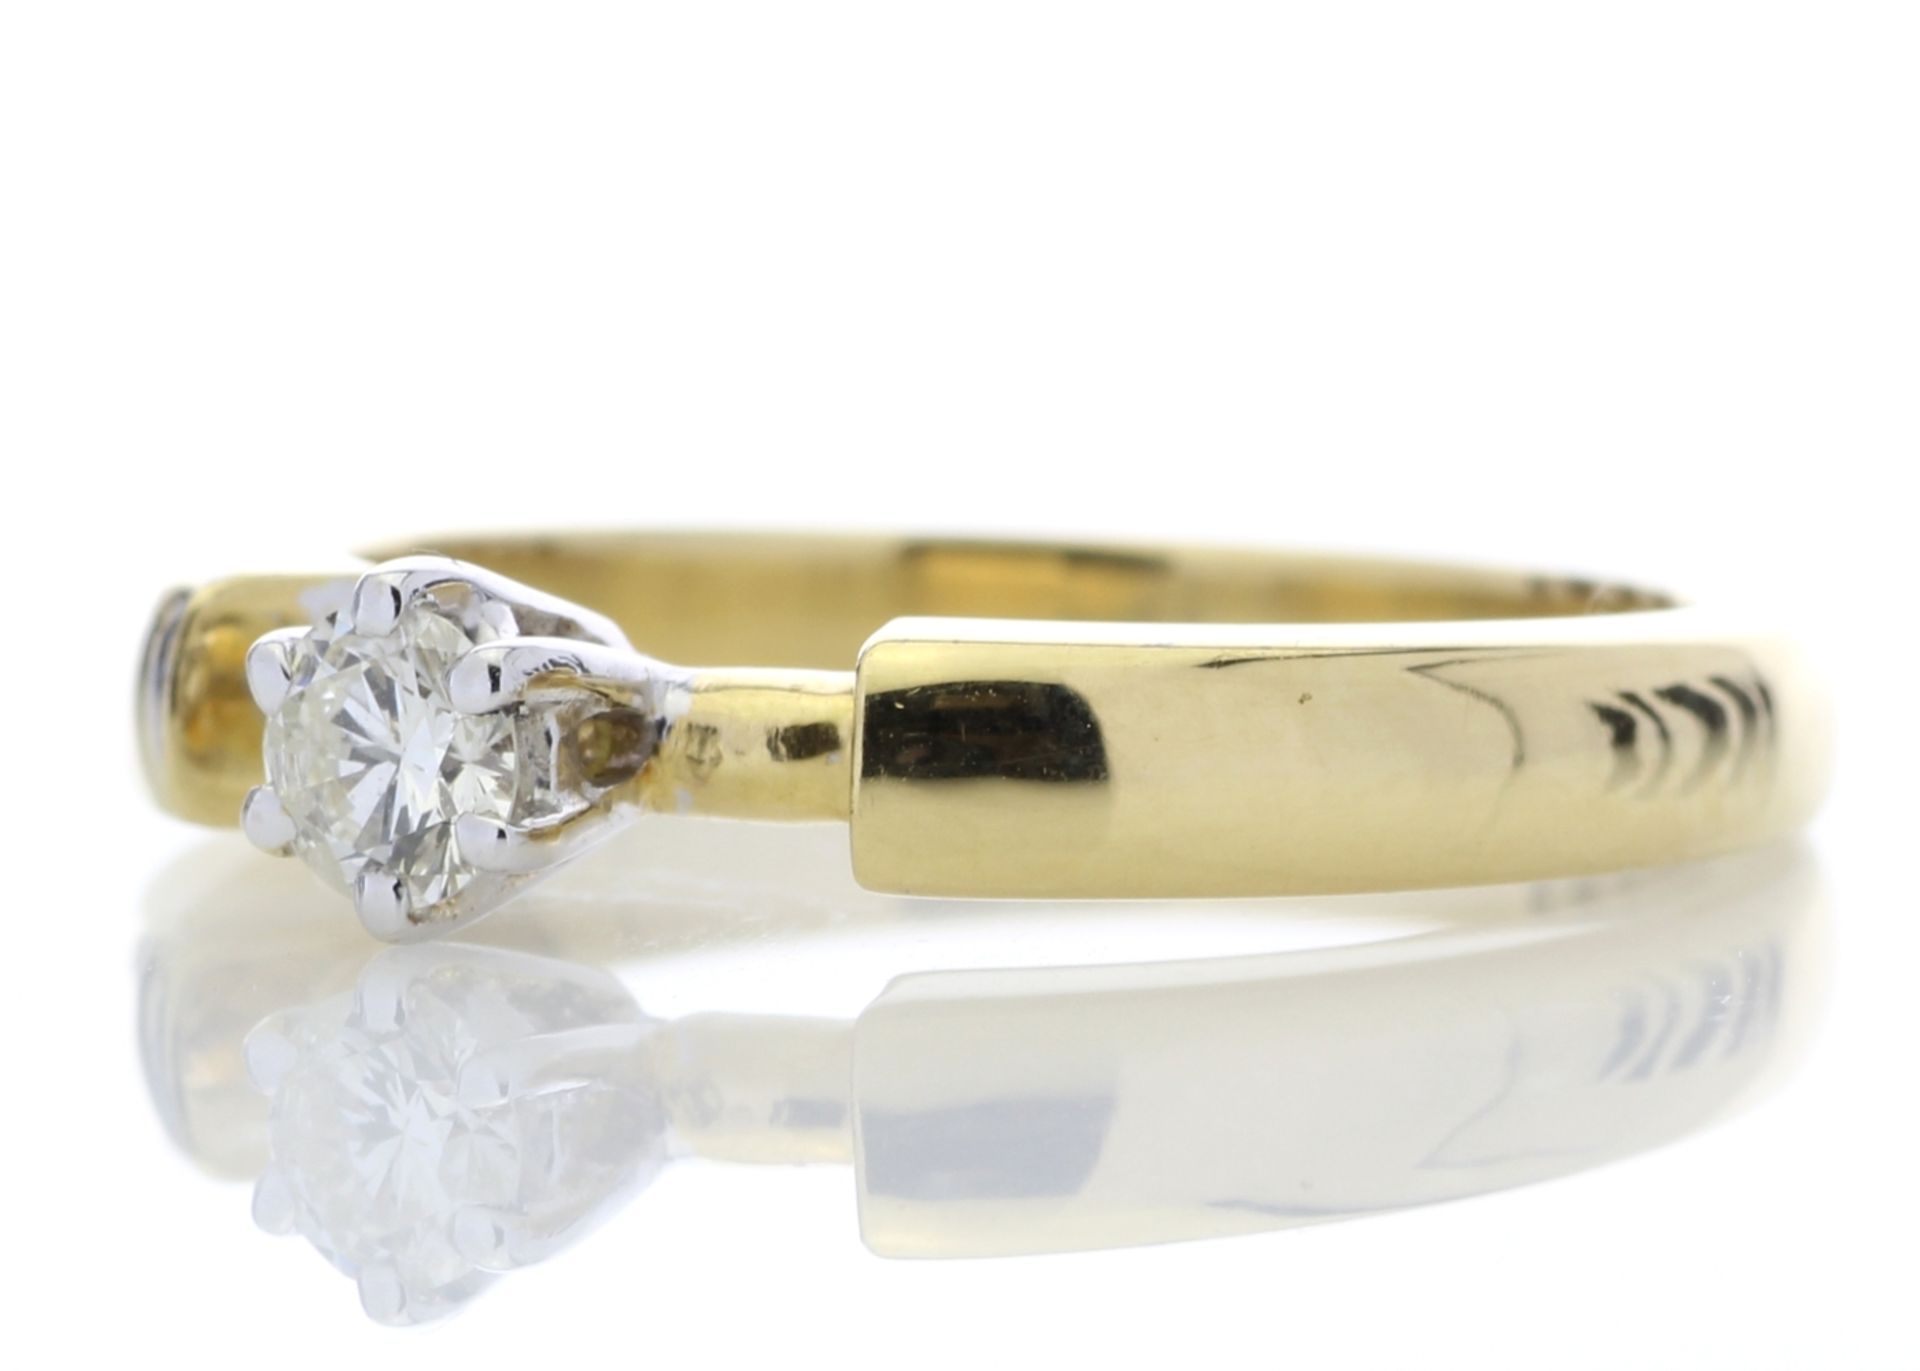 18ct Single Stone Fancy Claw Set Diamond Ring 0.20 Carats - Valued by GIE £7,595.00 - A beautiful - Image 2 of 9